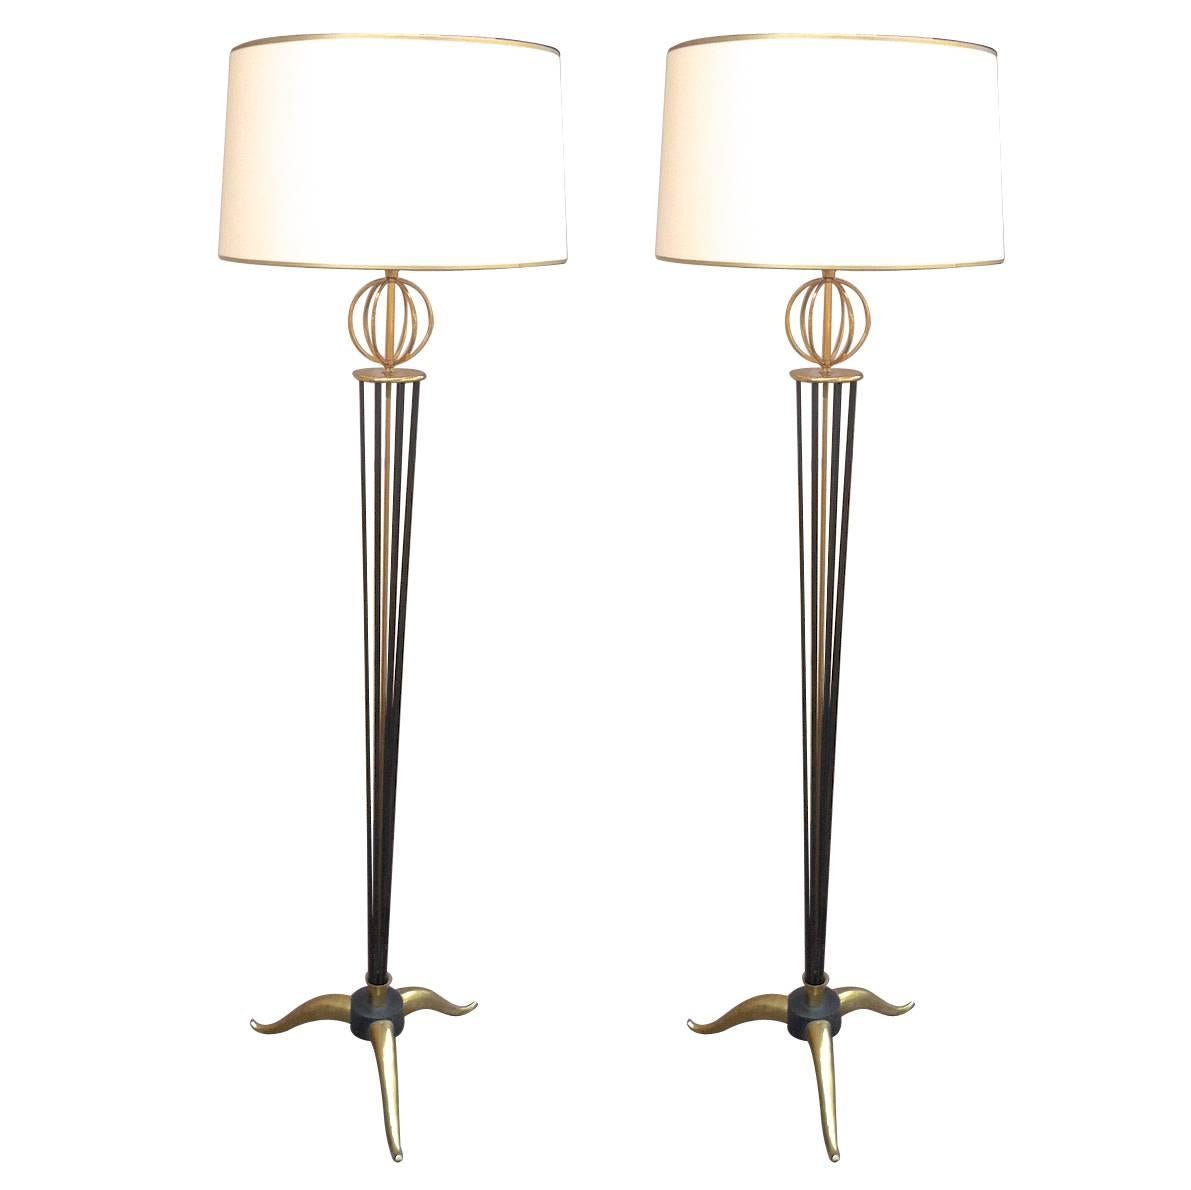 Maison Arlus Documented Pair of Standing Lamps with Globe and Tripod Legs For Sale